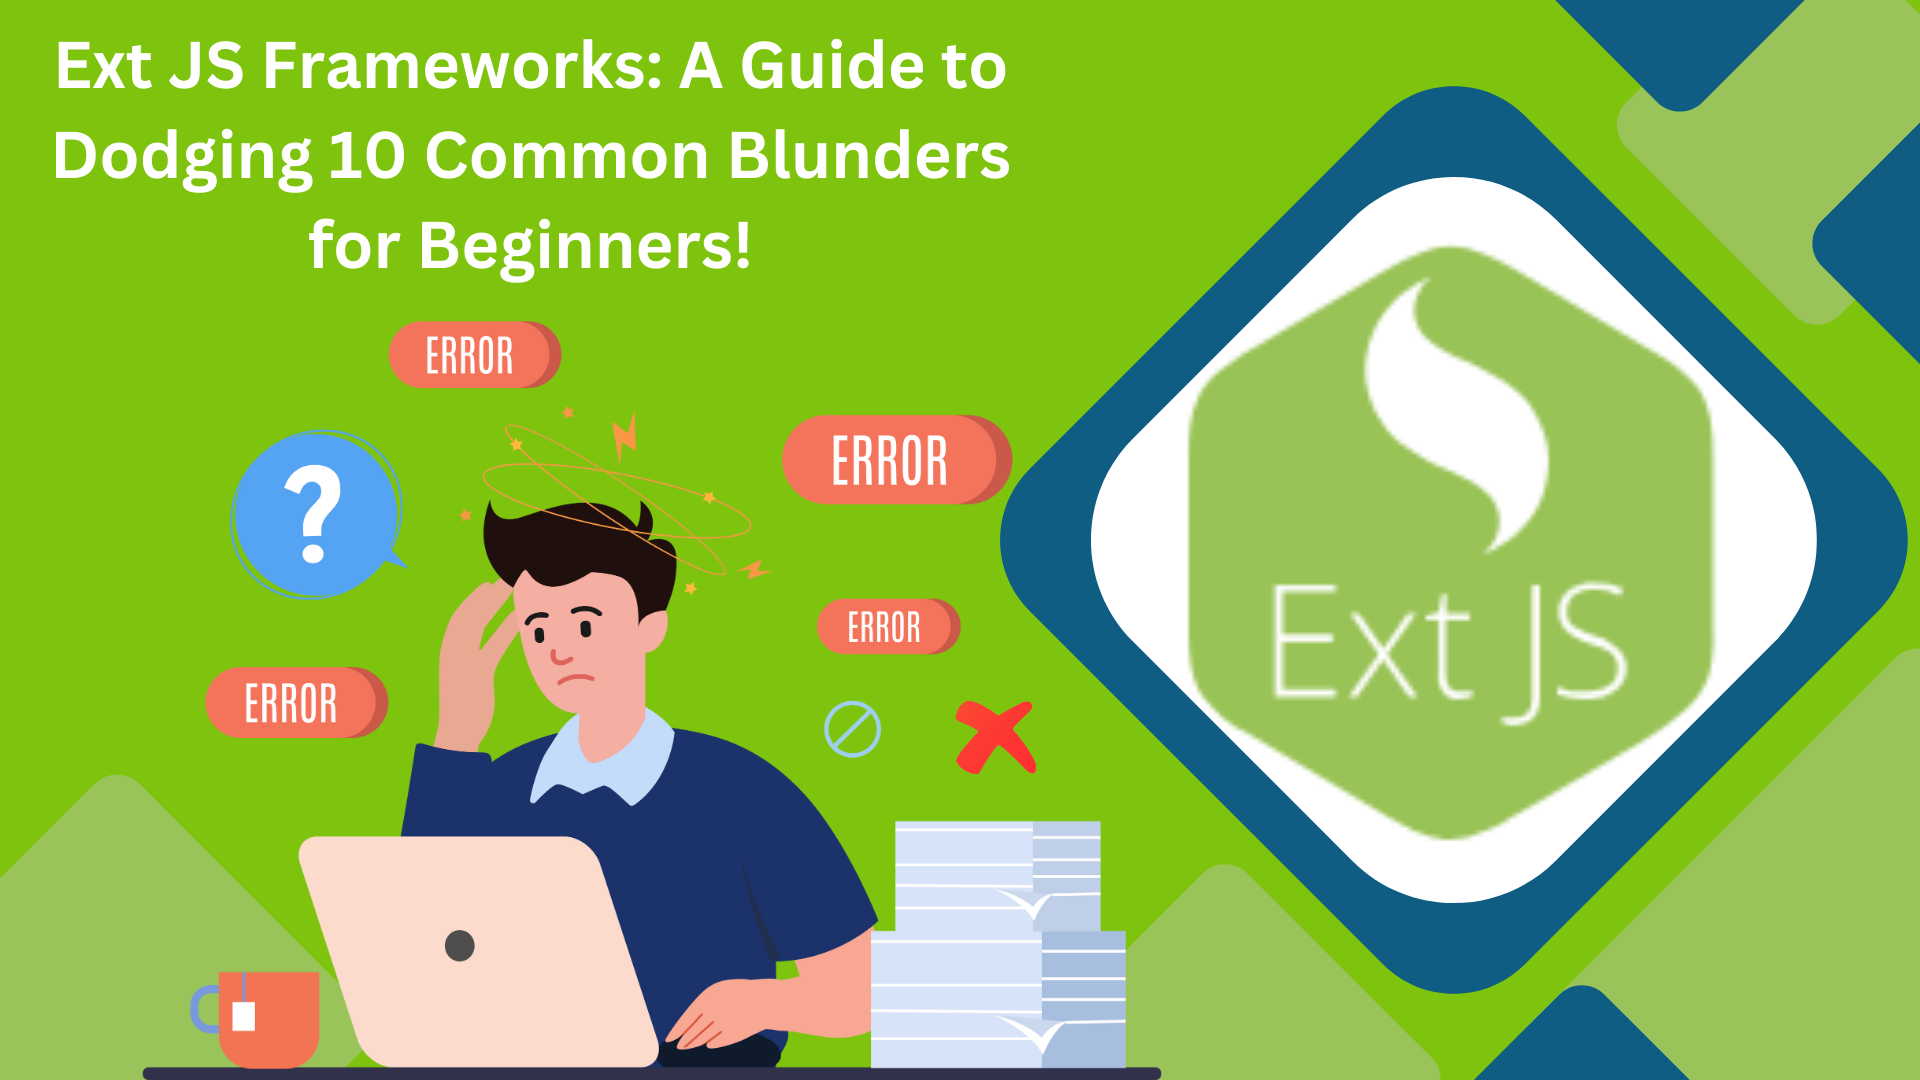 Ext JS Frameworks: A Guide to Dodging 10 Common Blunders for Beginners!